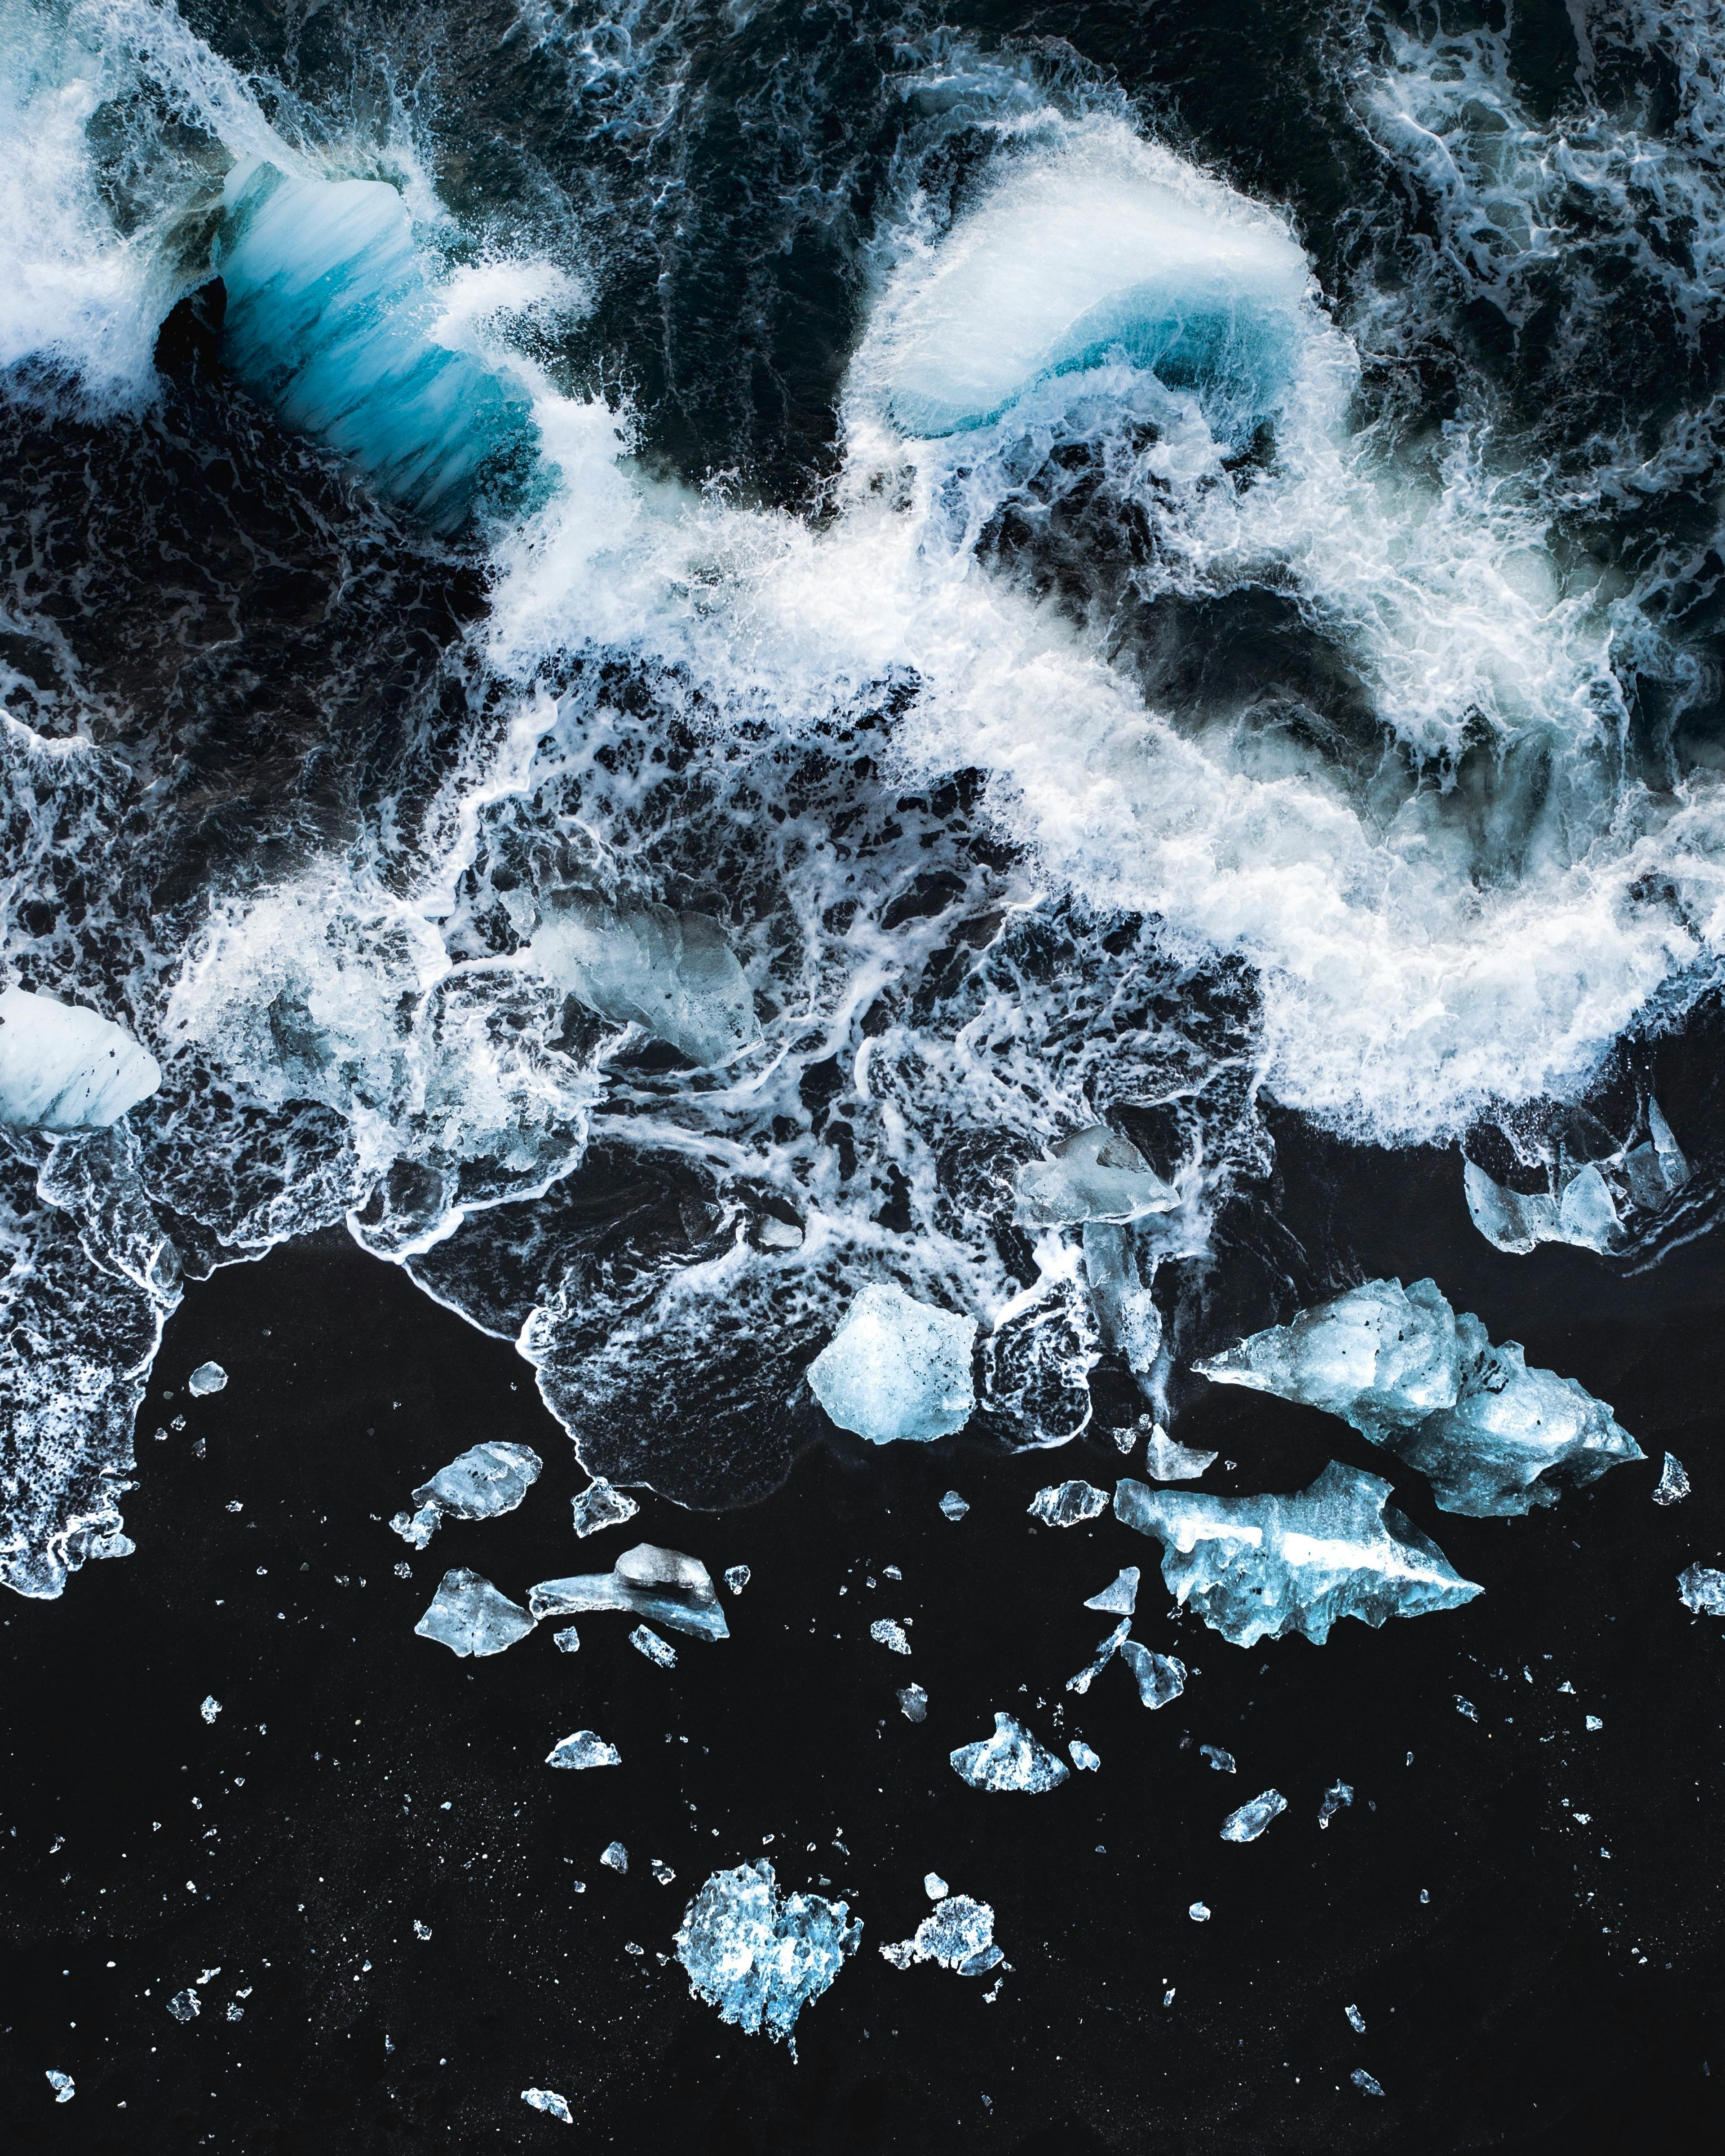 Aerial view of a dark shoreline with scattered pieces of blue-tinged ice, contrasting against the white foam of the breaking waves.